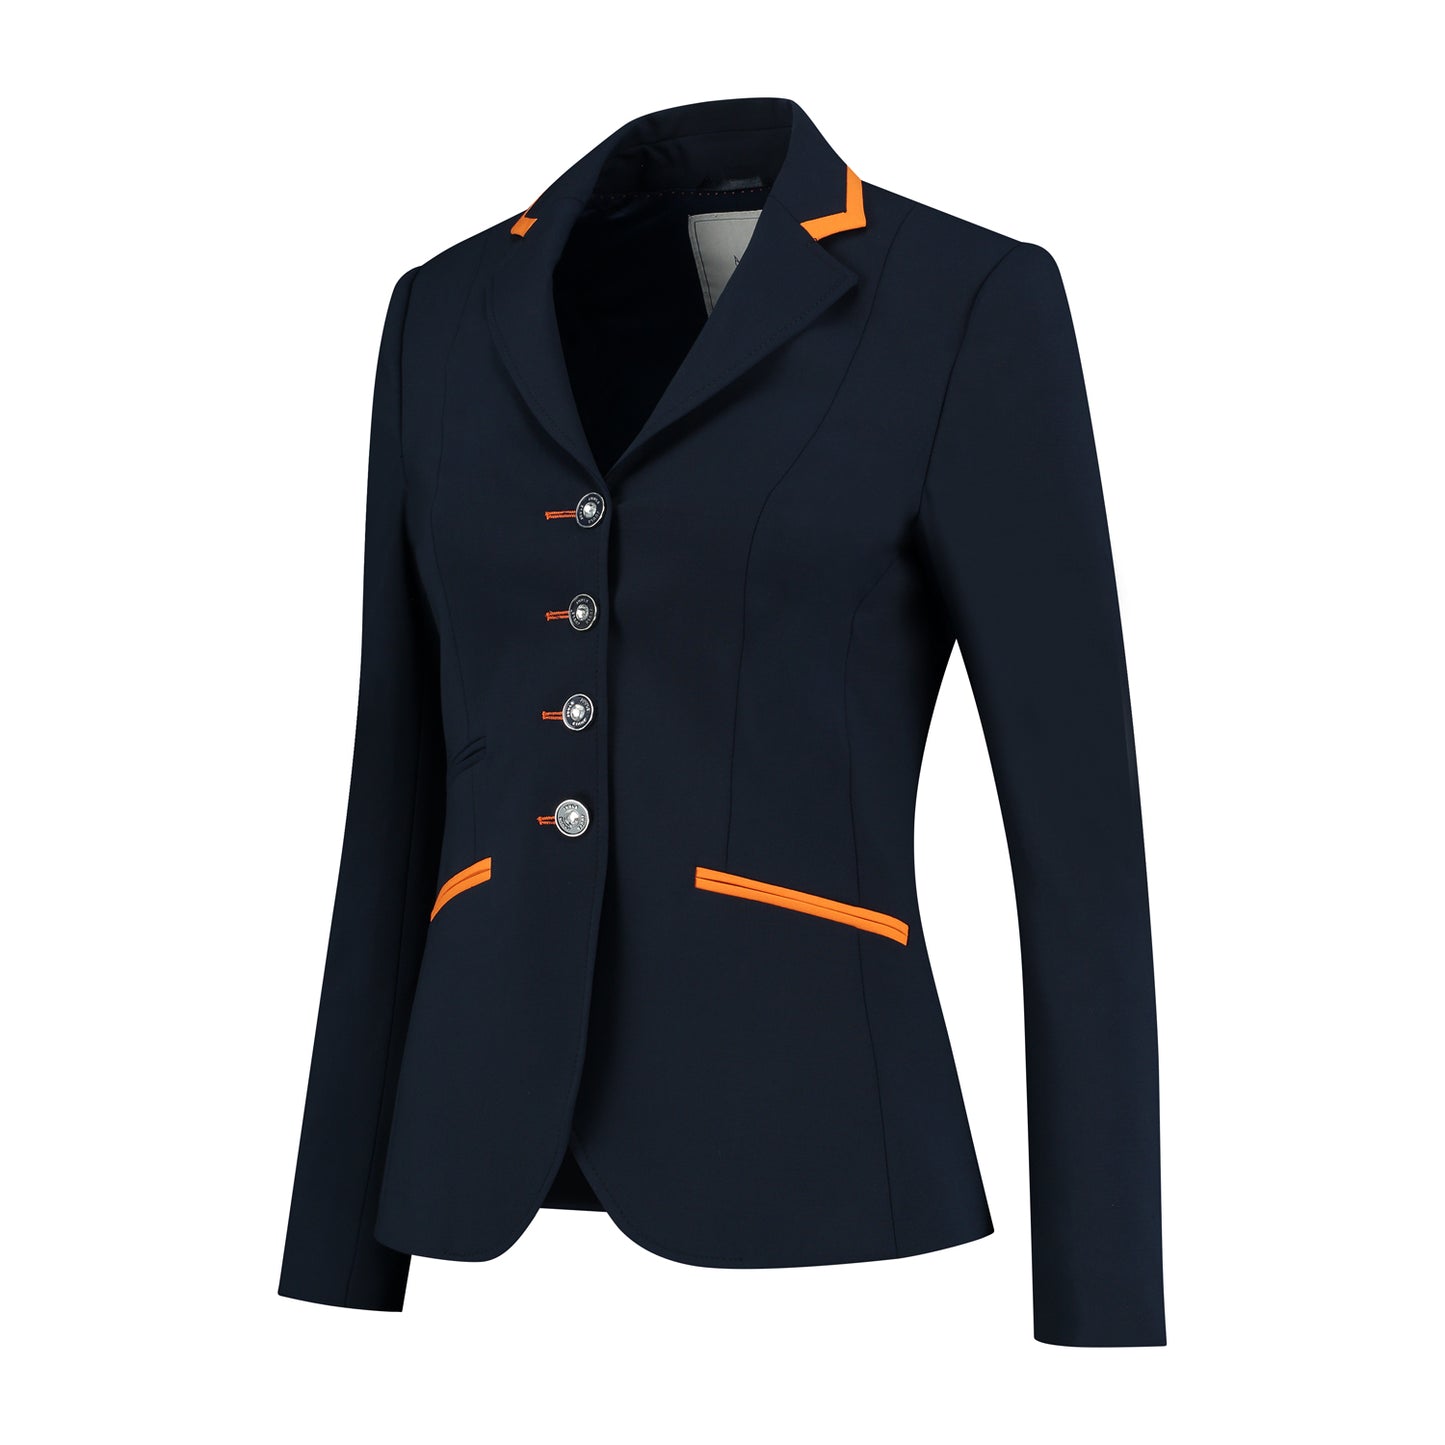 Navy competition jacket - orange piping